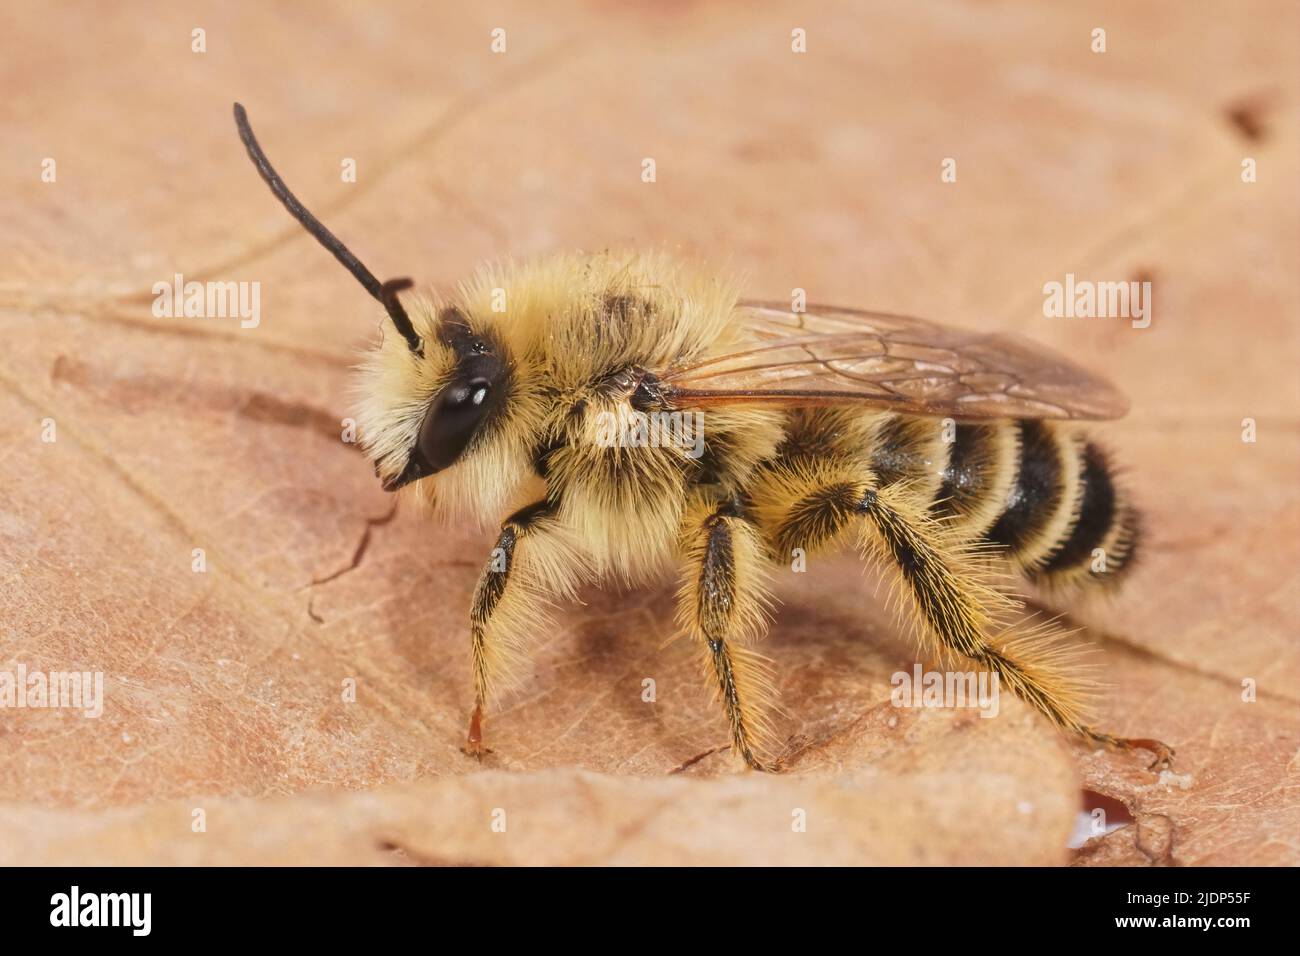 Detailed closeup on a hairy male Pantaloon bee, Dasypoda hirtipes sitting on a dried leaf Stock Photo